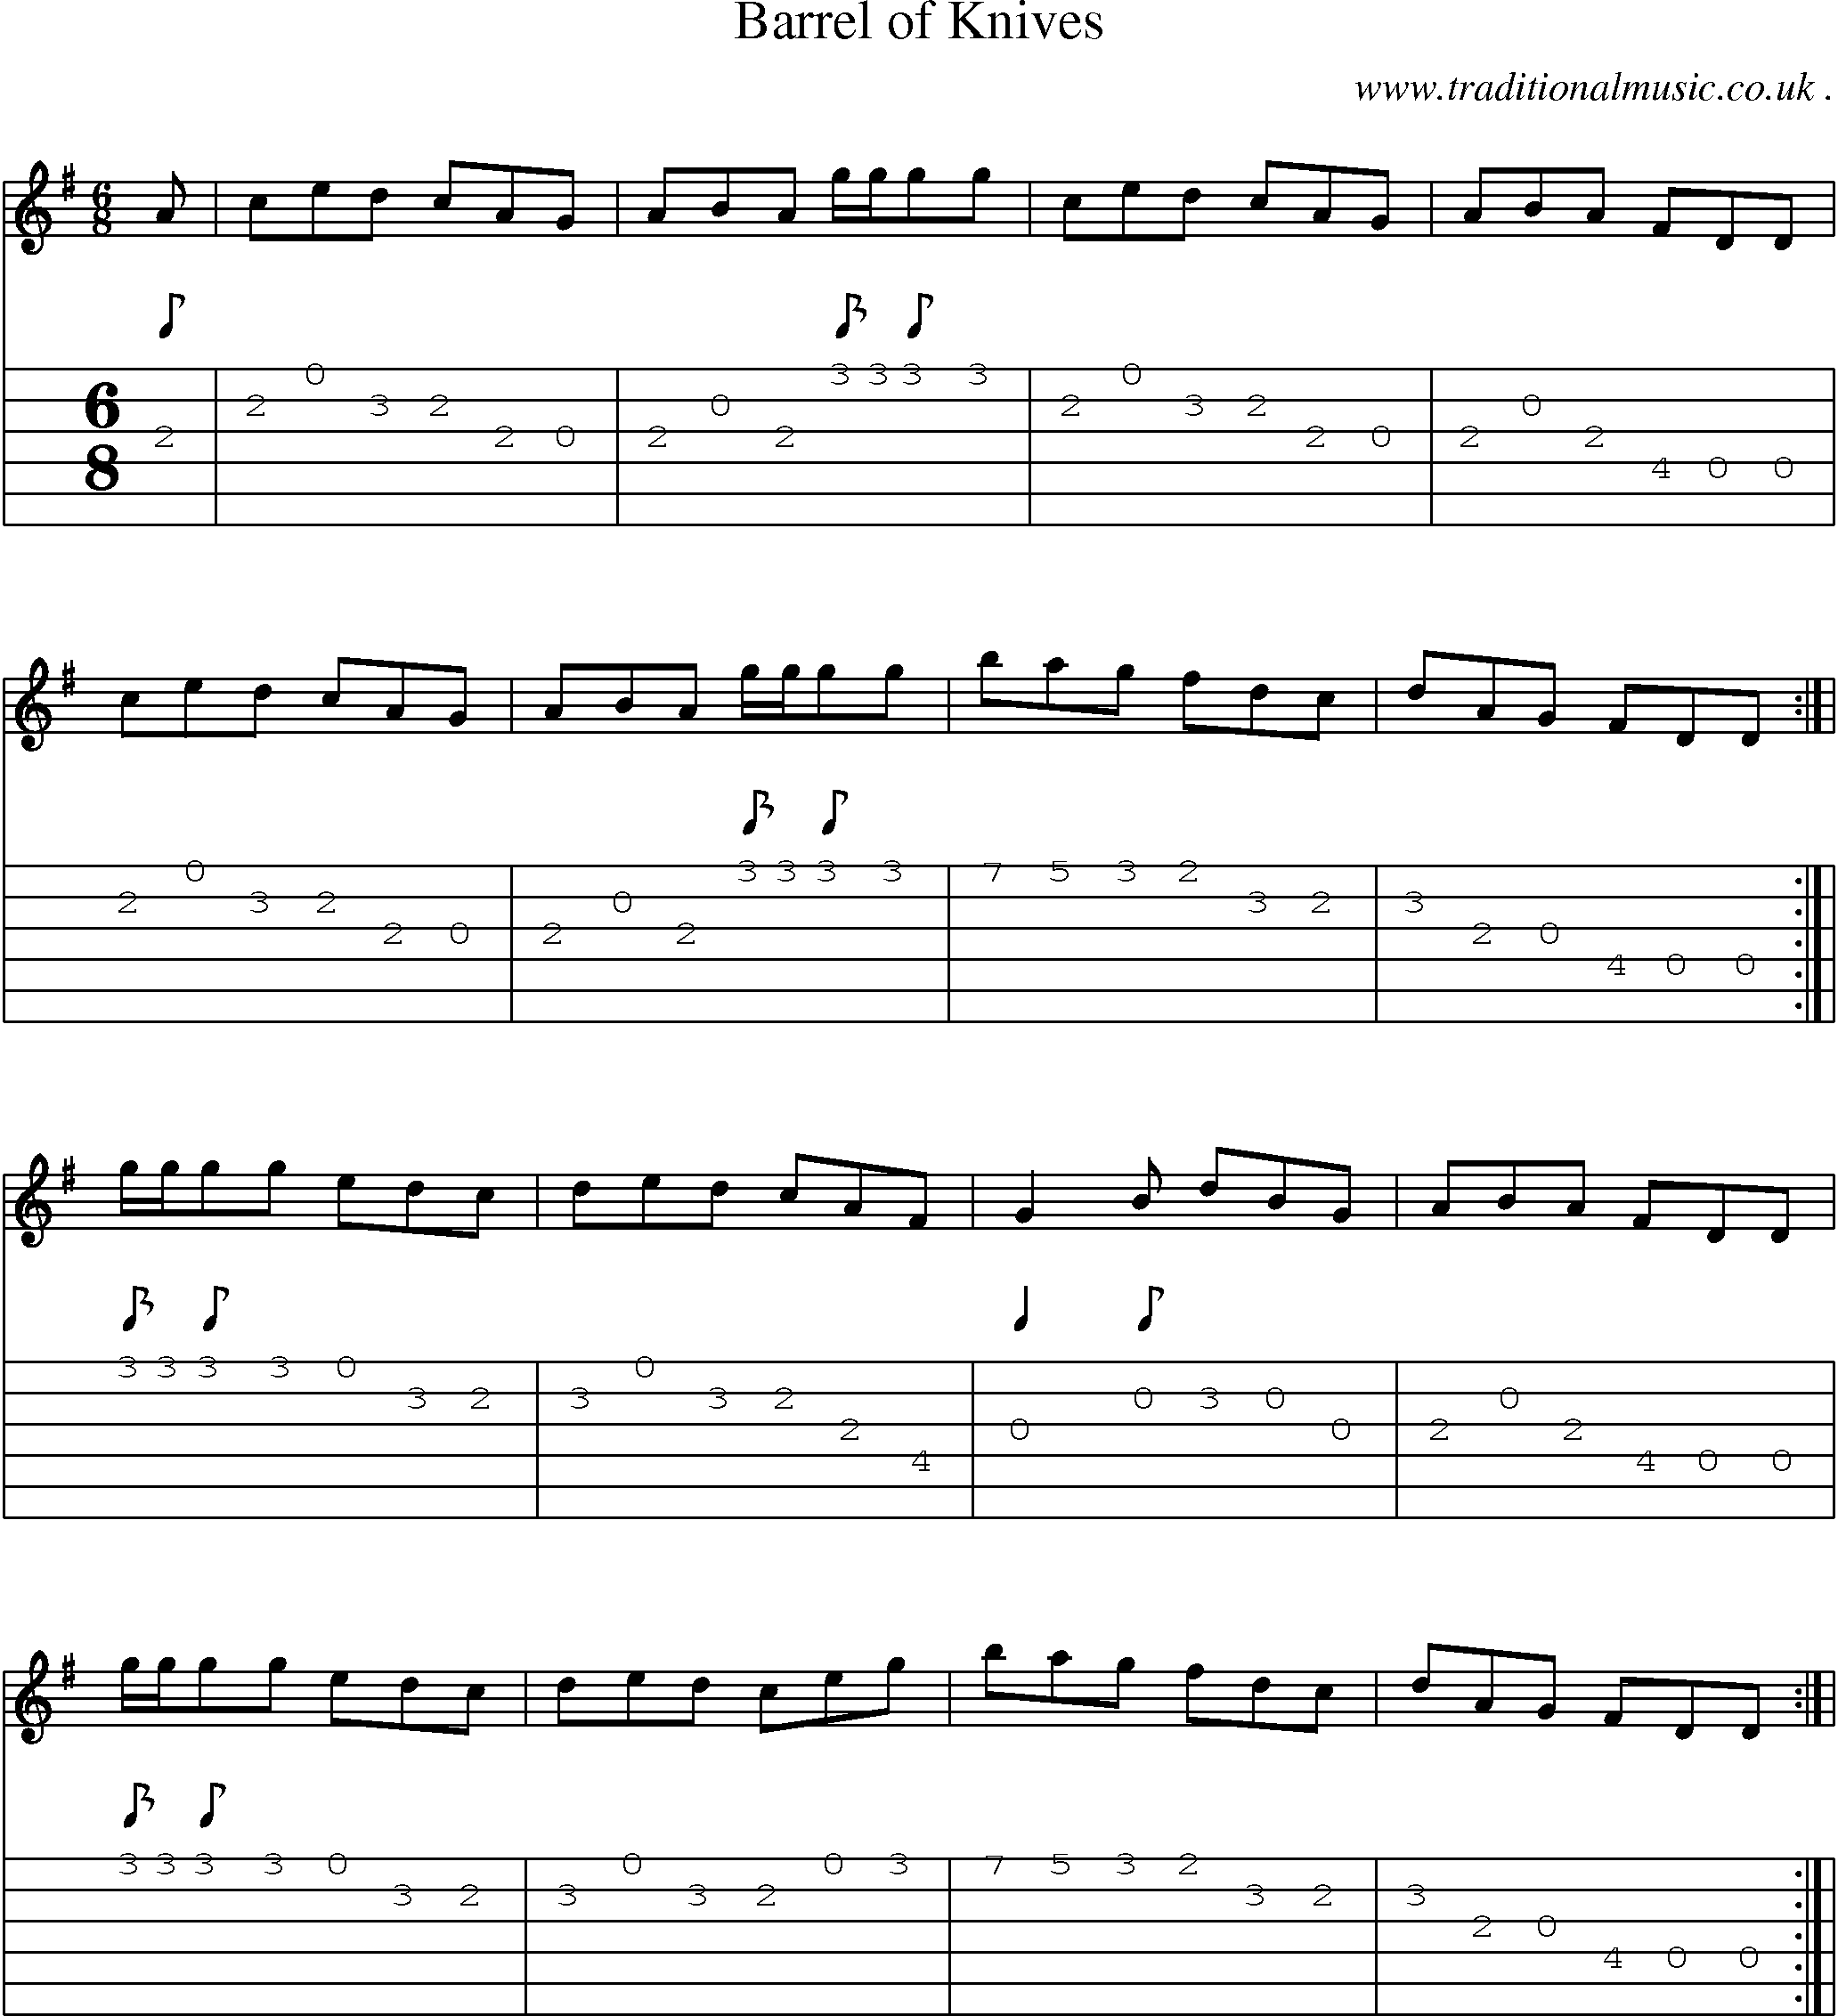 Sheet-Music and Guitar Tabs for Barrel Of Knives